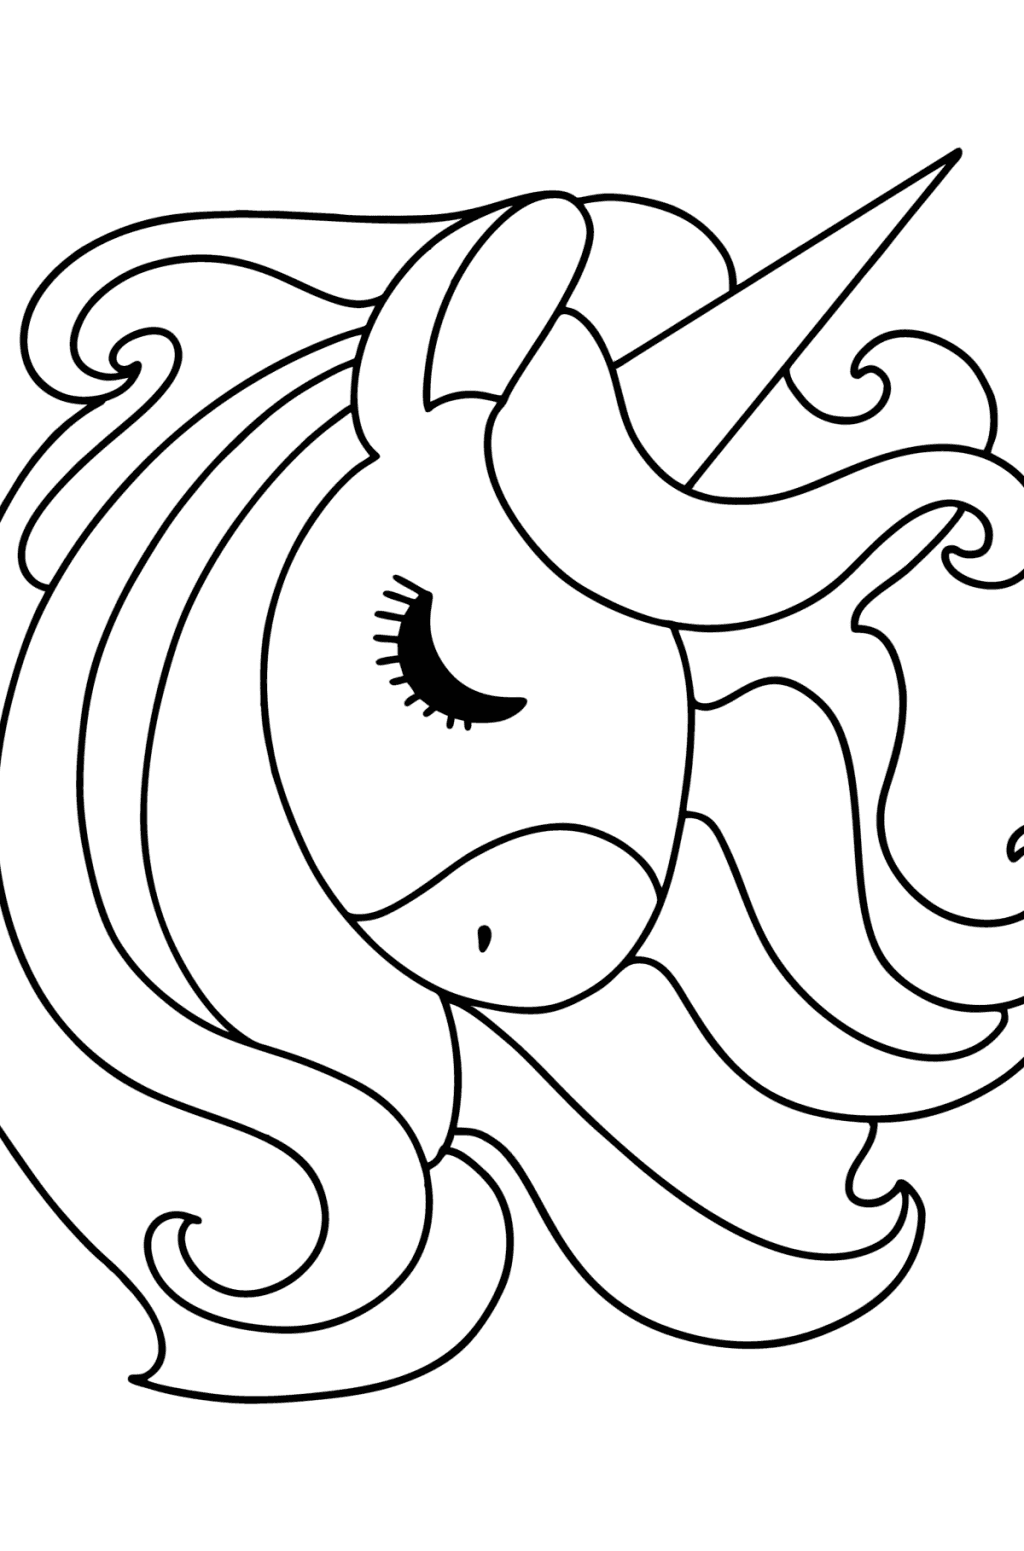 Unicorns Coloring Pages - Download, Print, and Color Online!